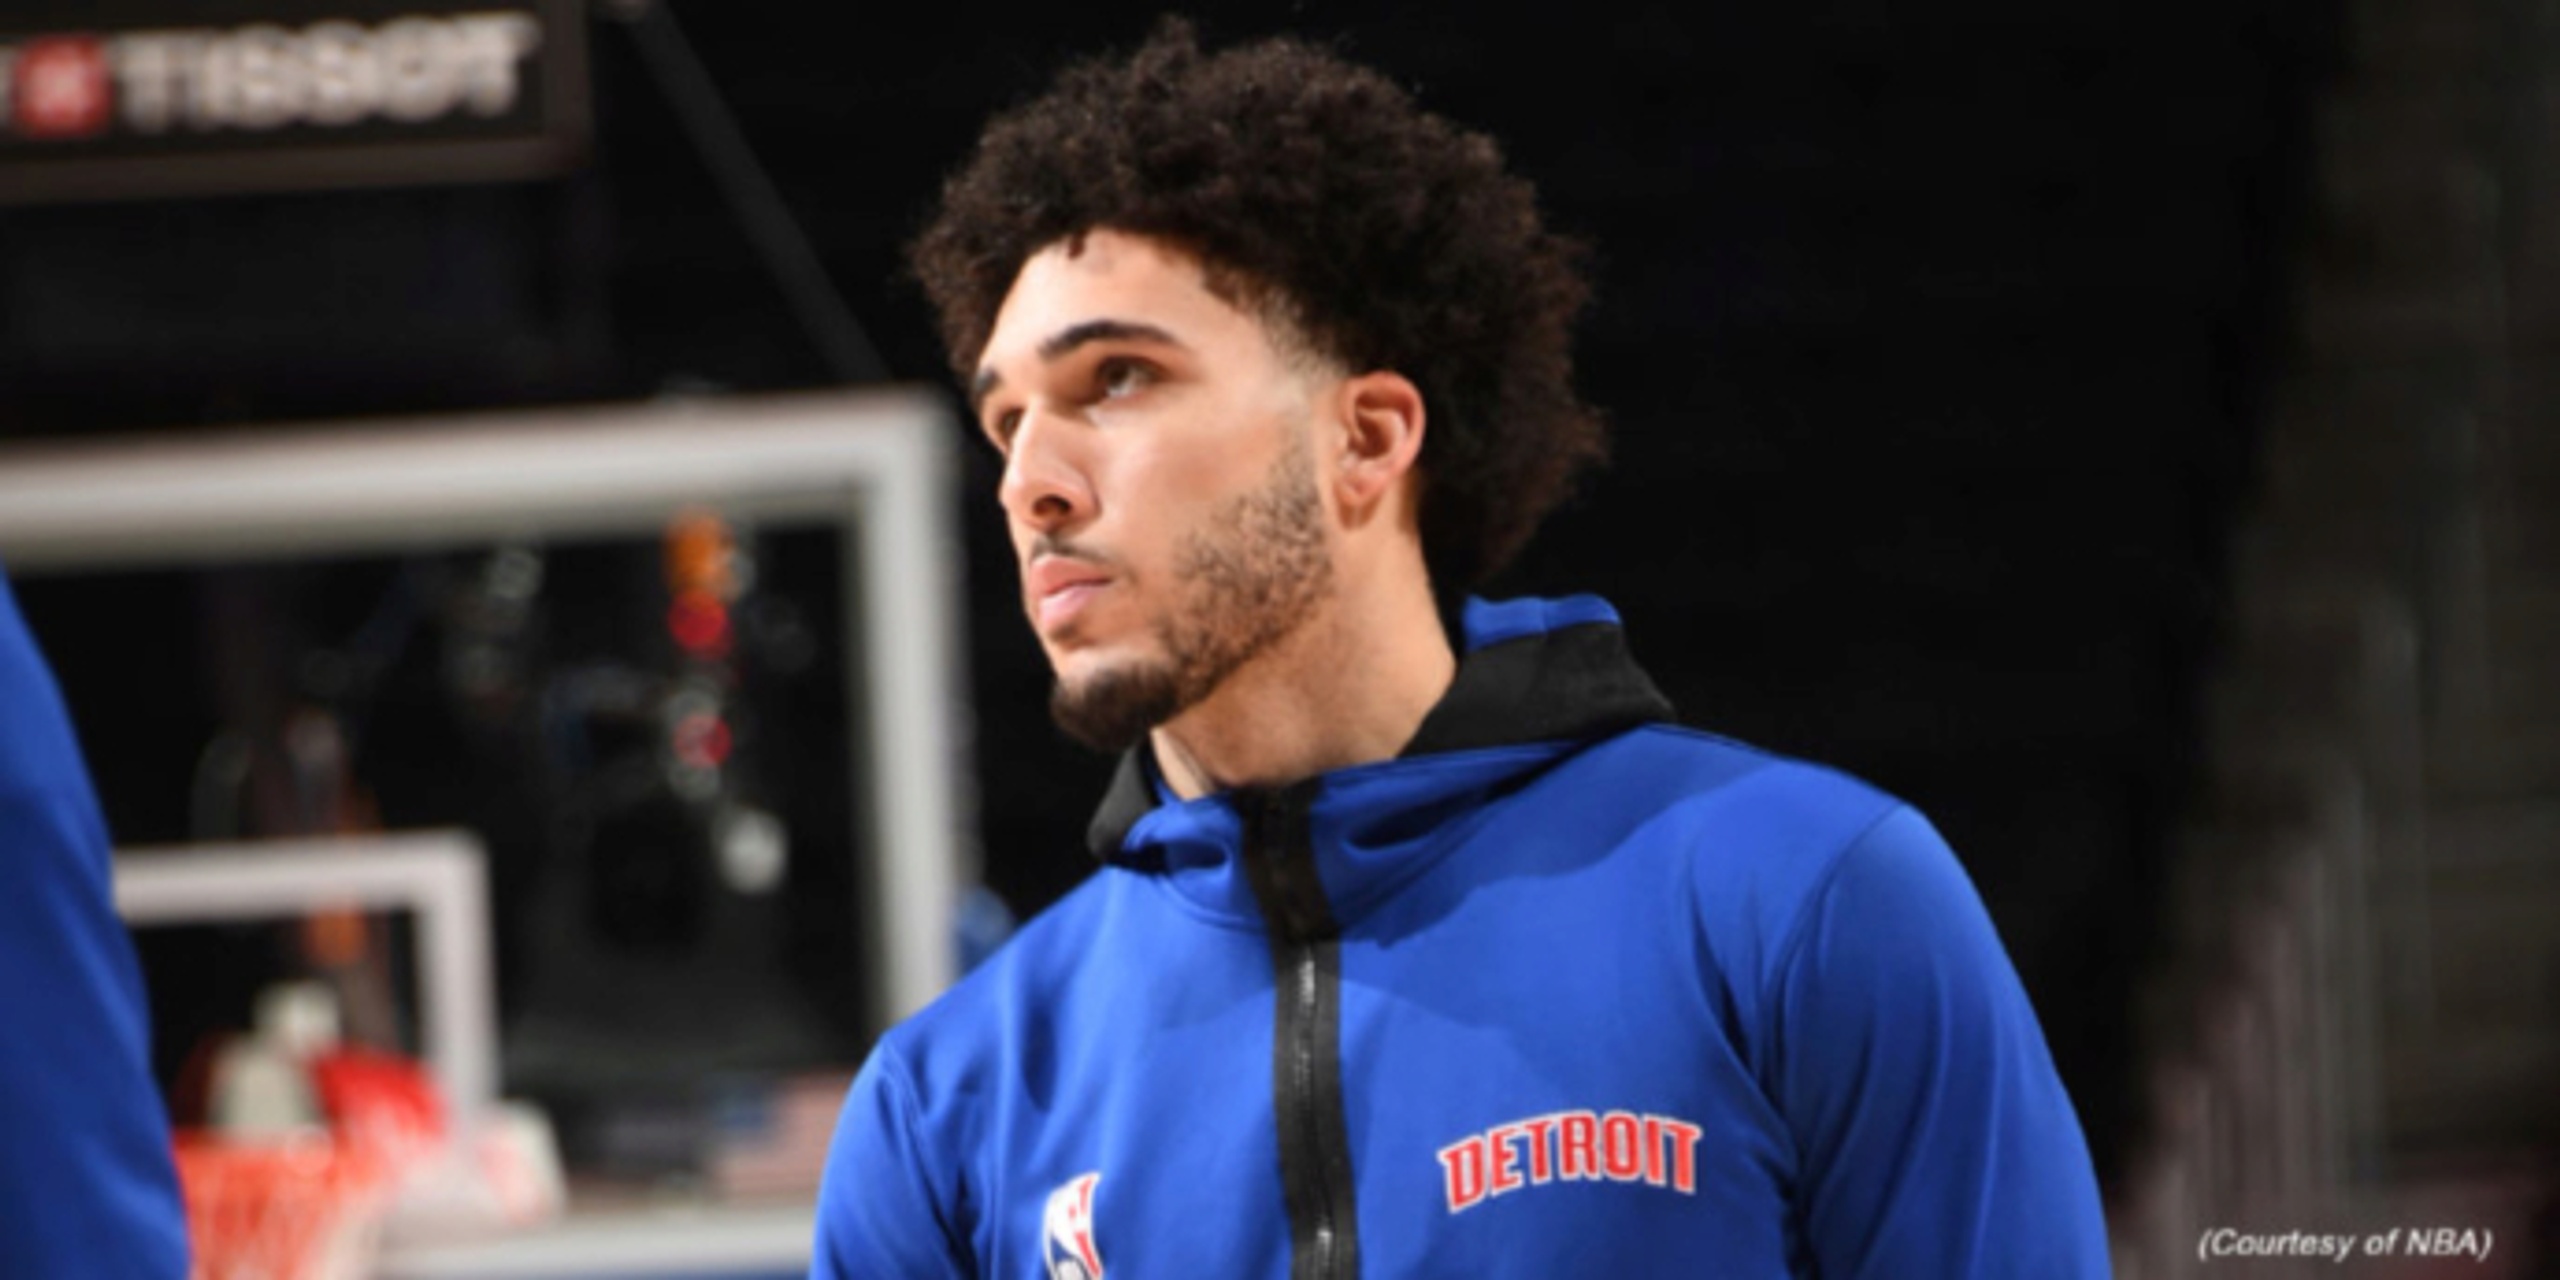 LiAngelo Ball signs G League contract, to play in Orlando bubble